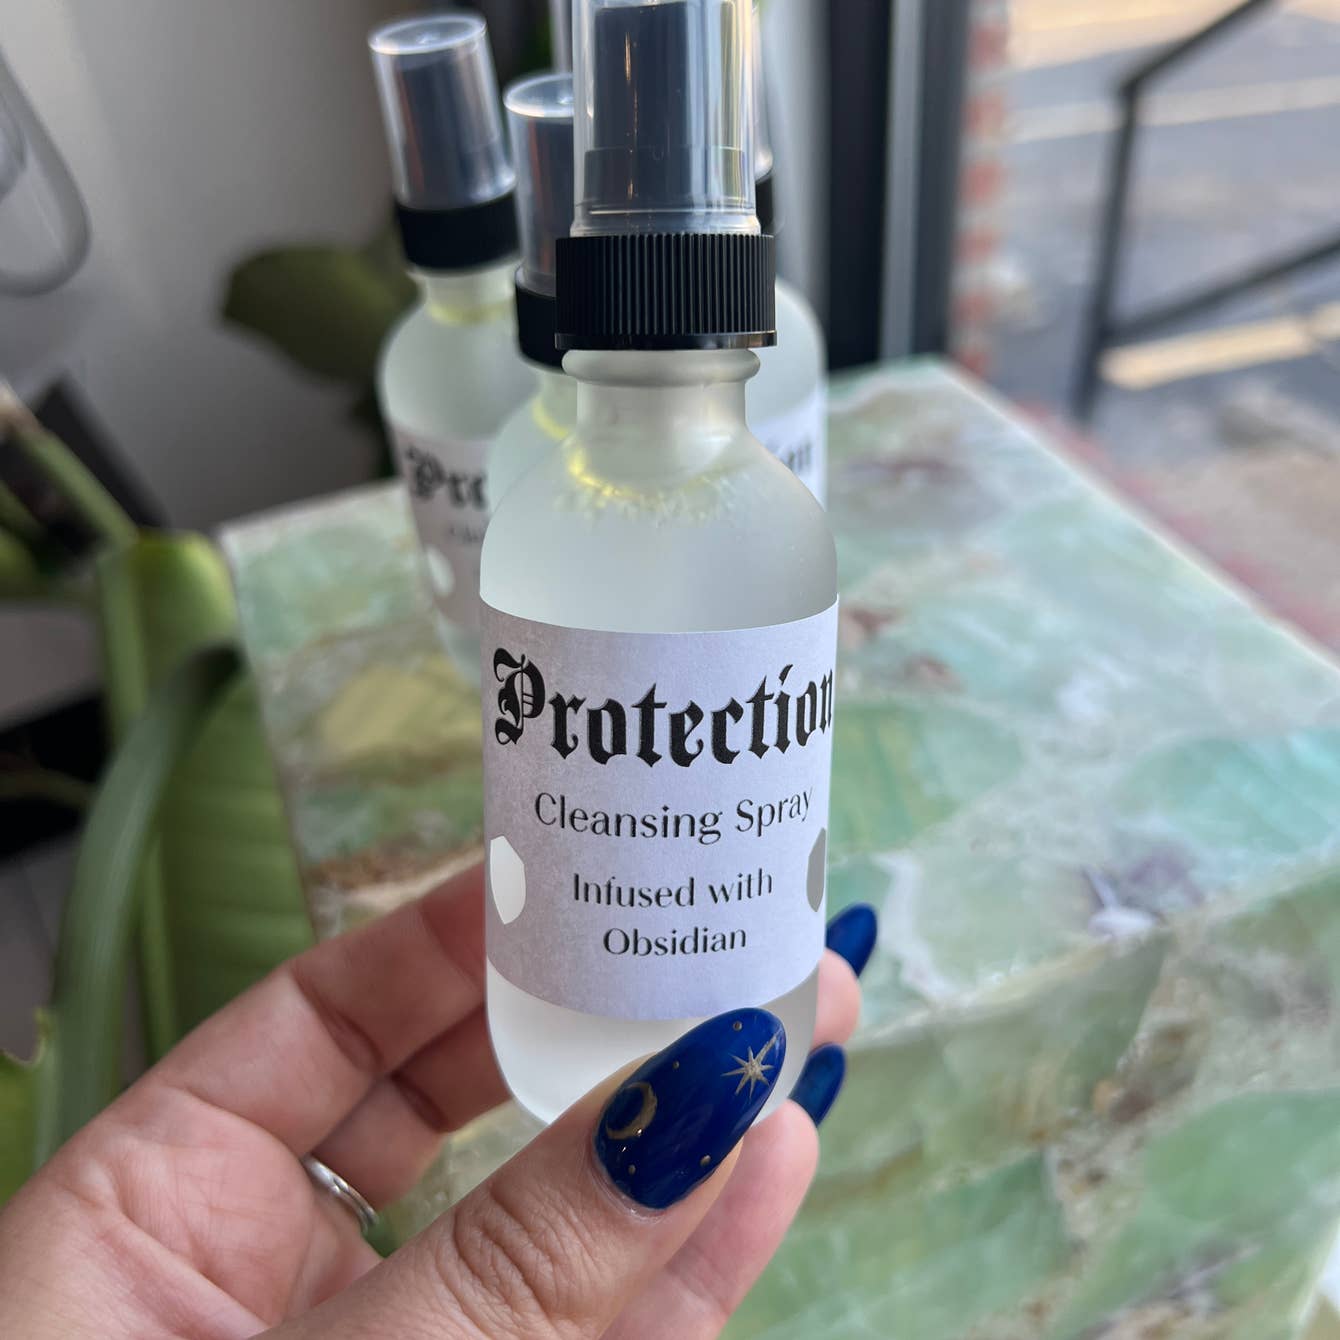 Protection Cleansing Spray